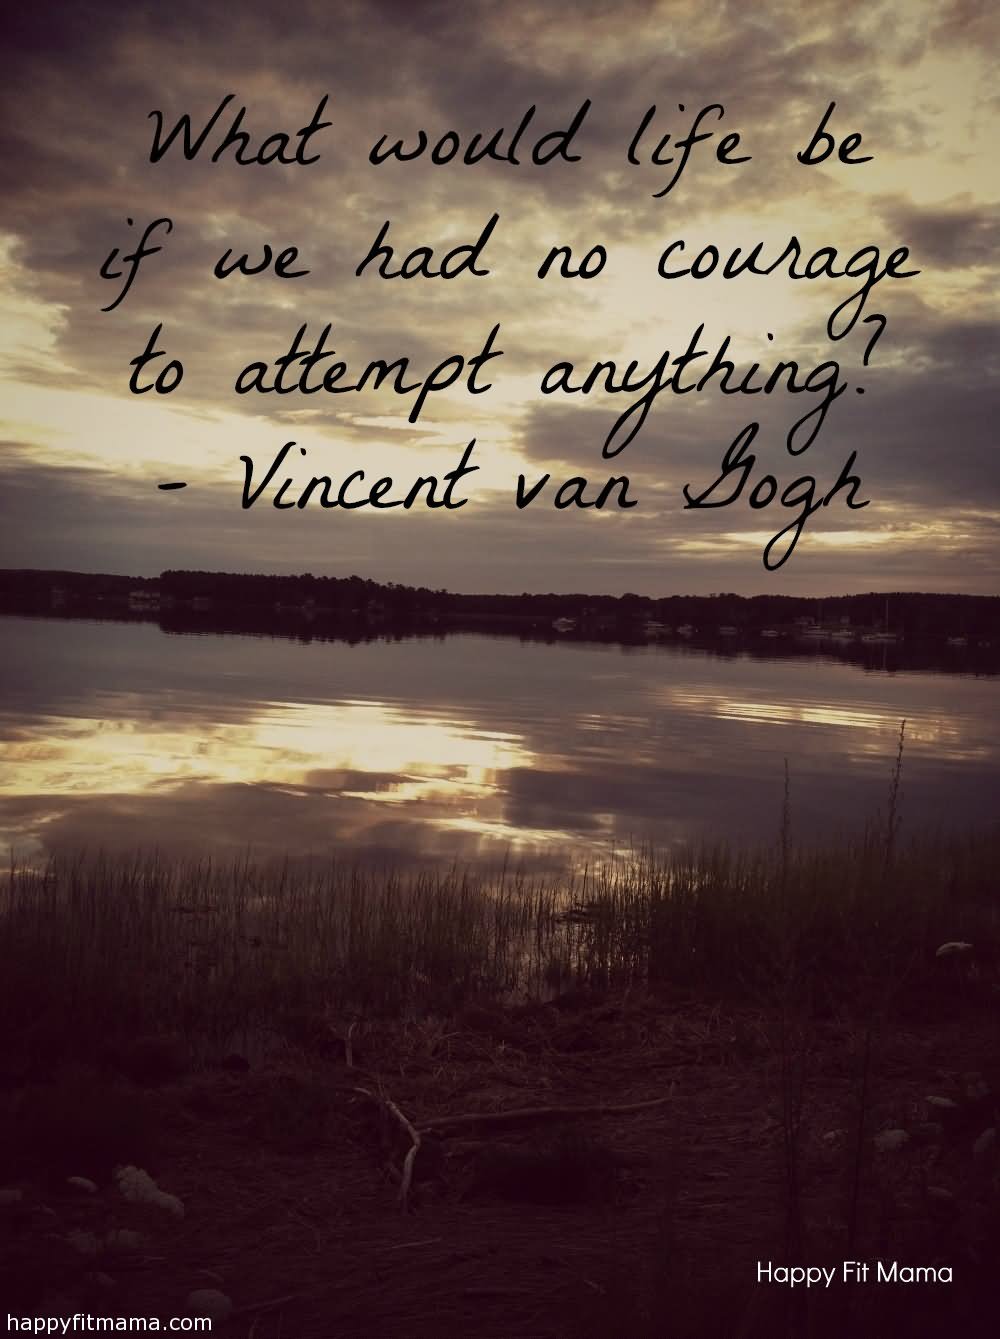 What would life be if we had no courage to attempt anything.